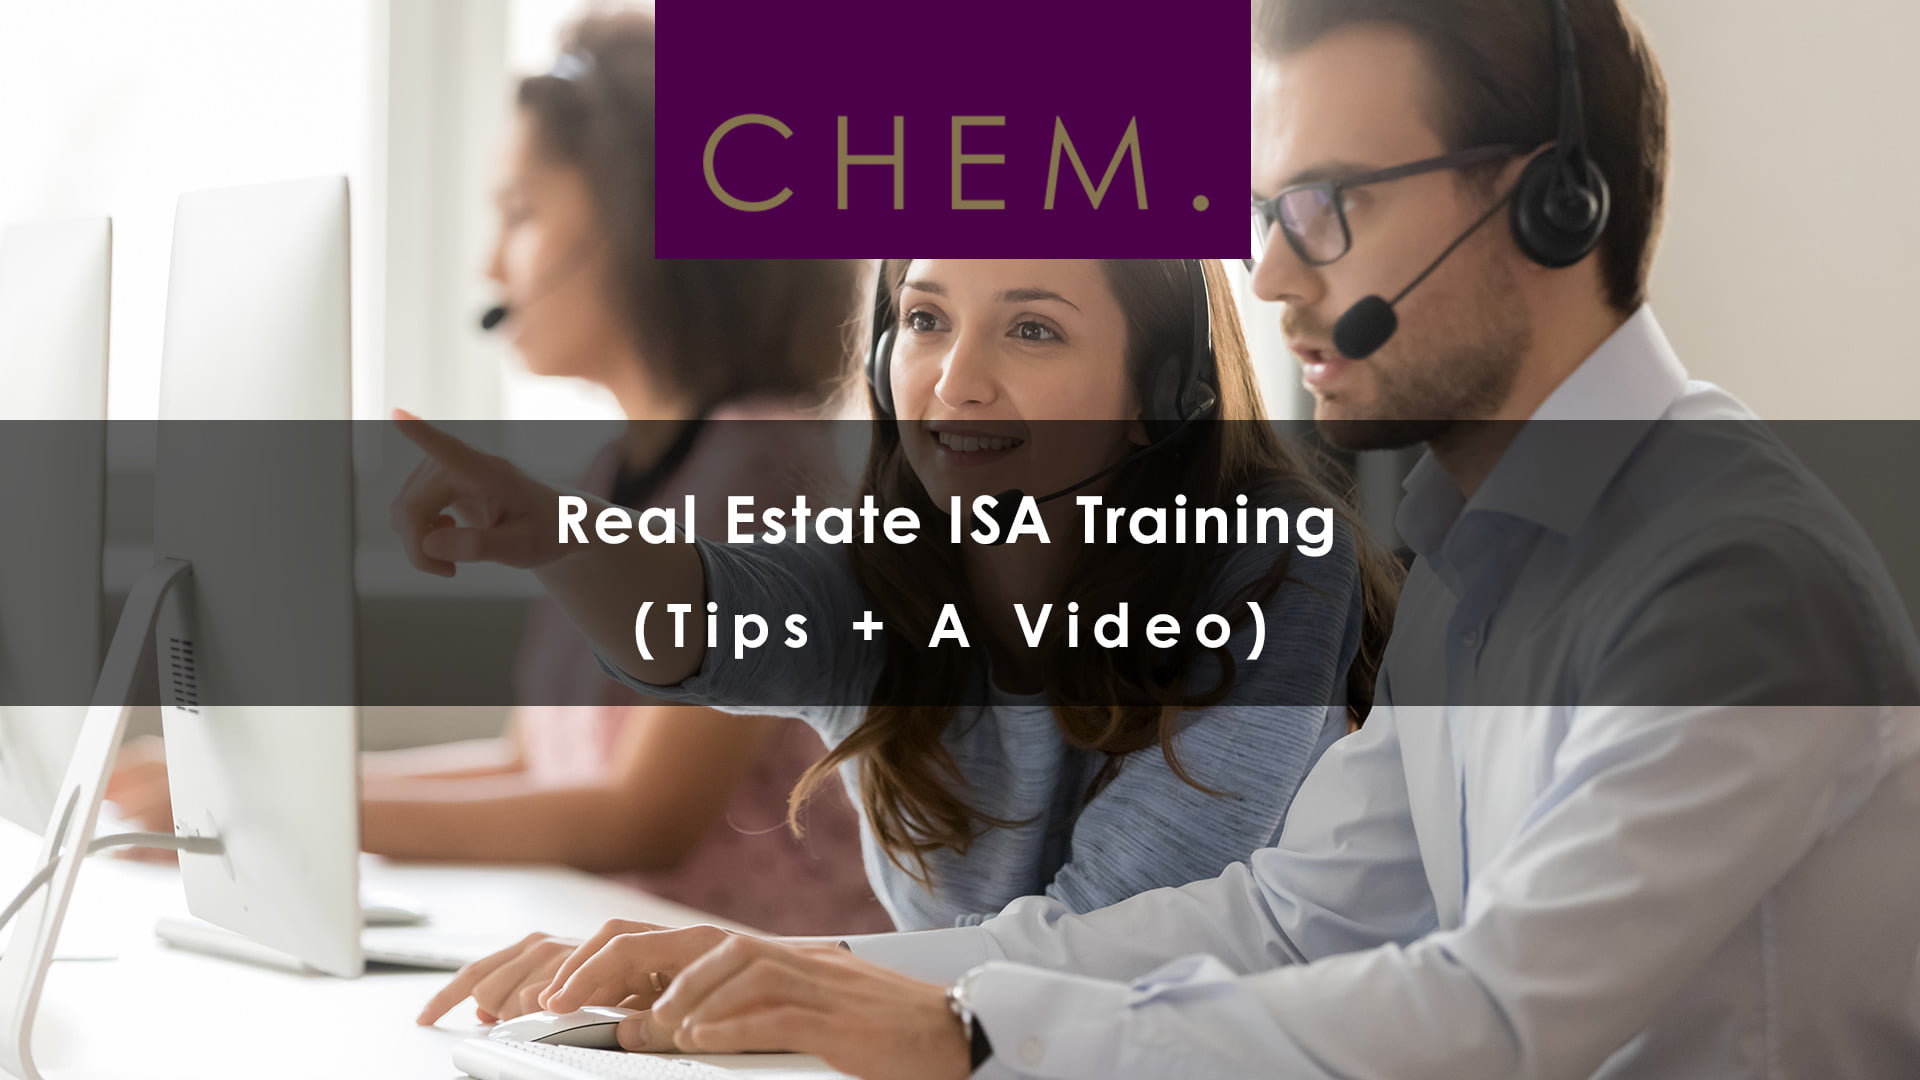 Real Estate ISA Training (Tips + A Video)